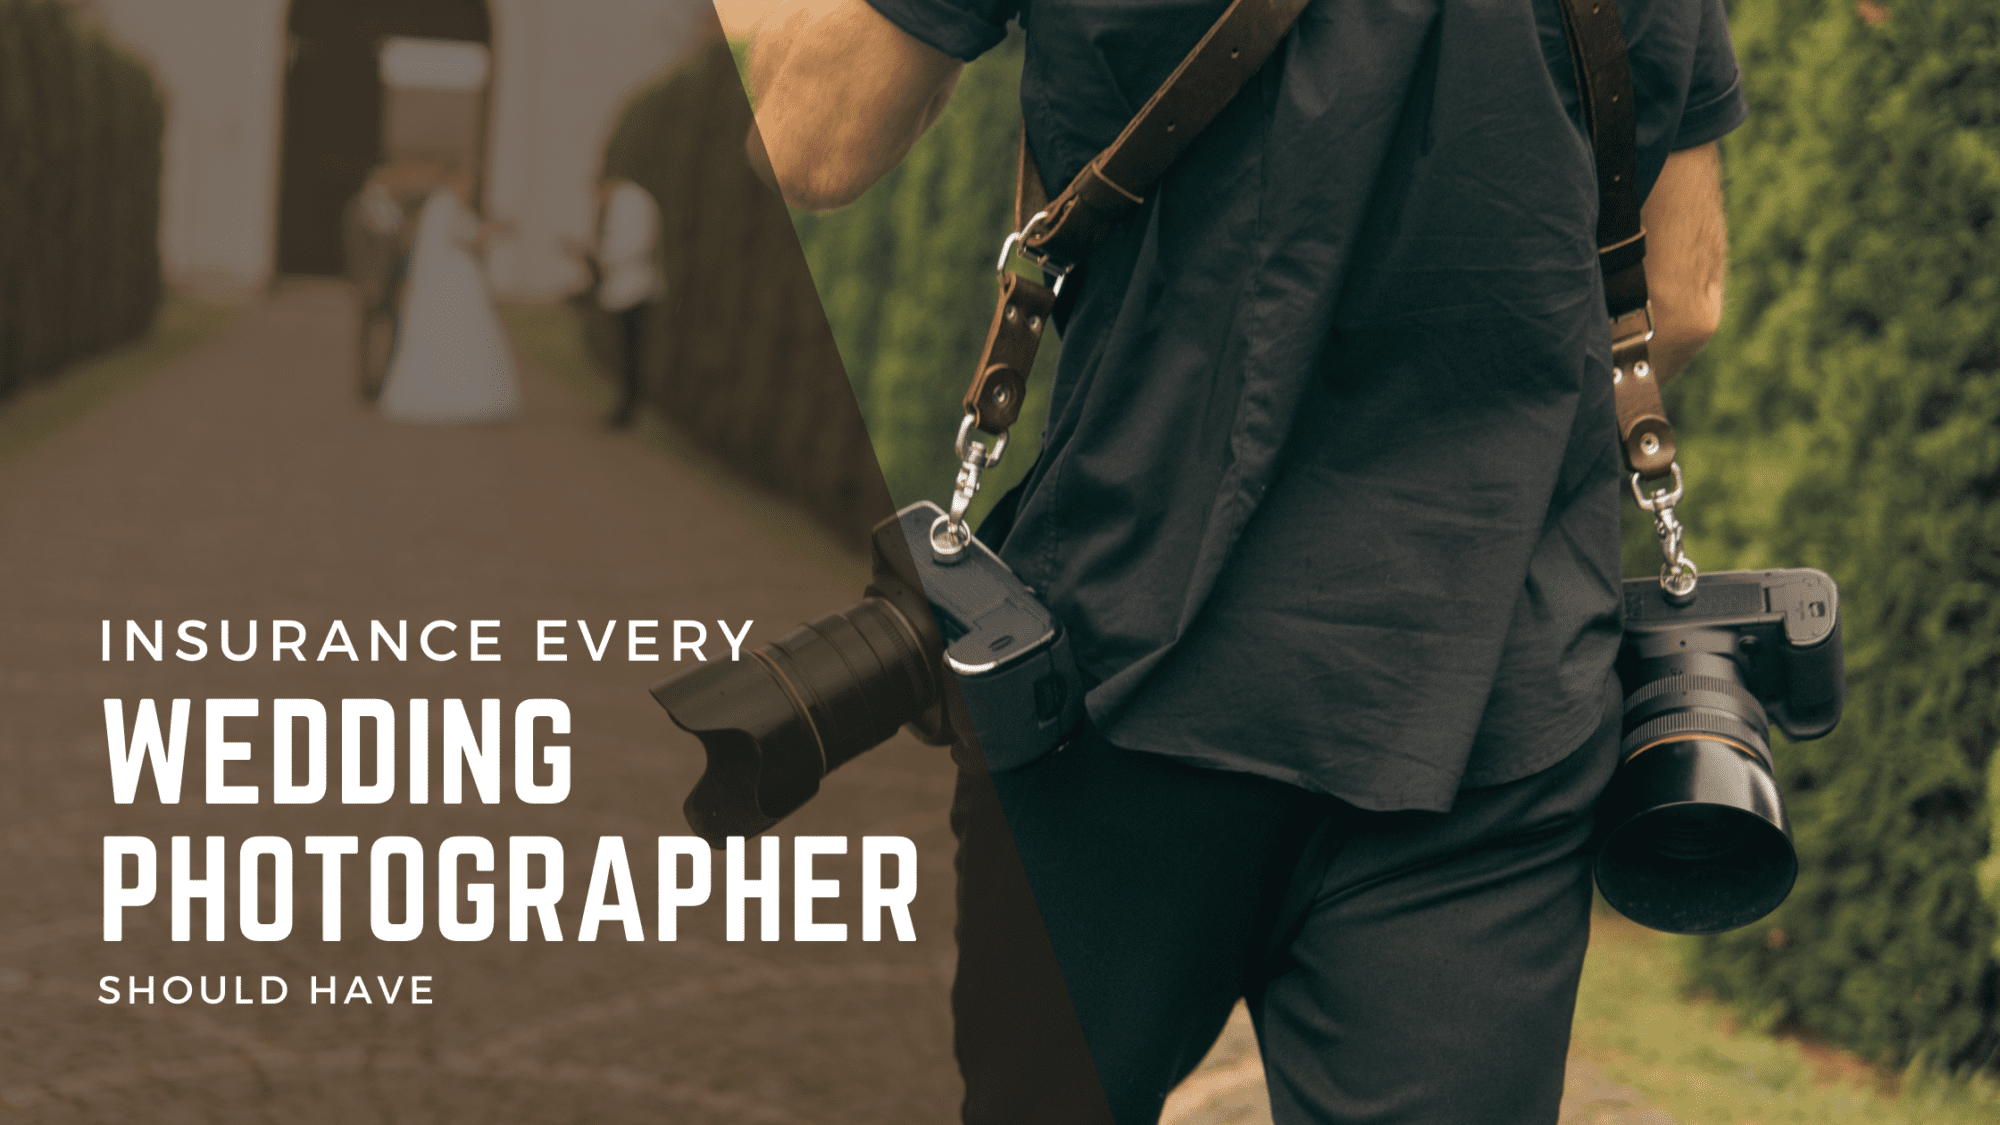 Insurance every wedding photographer should have